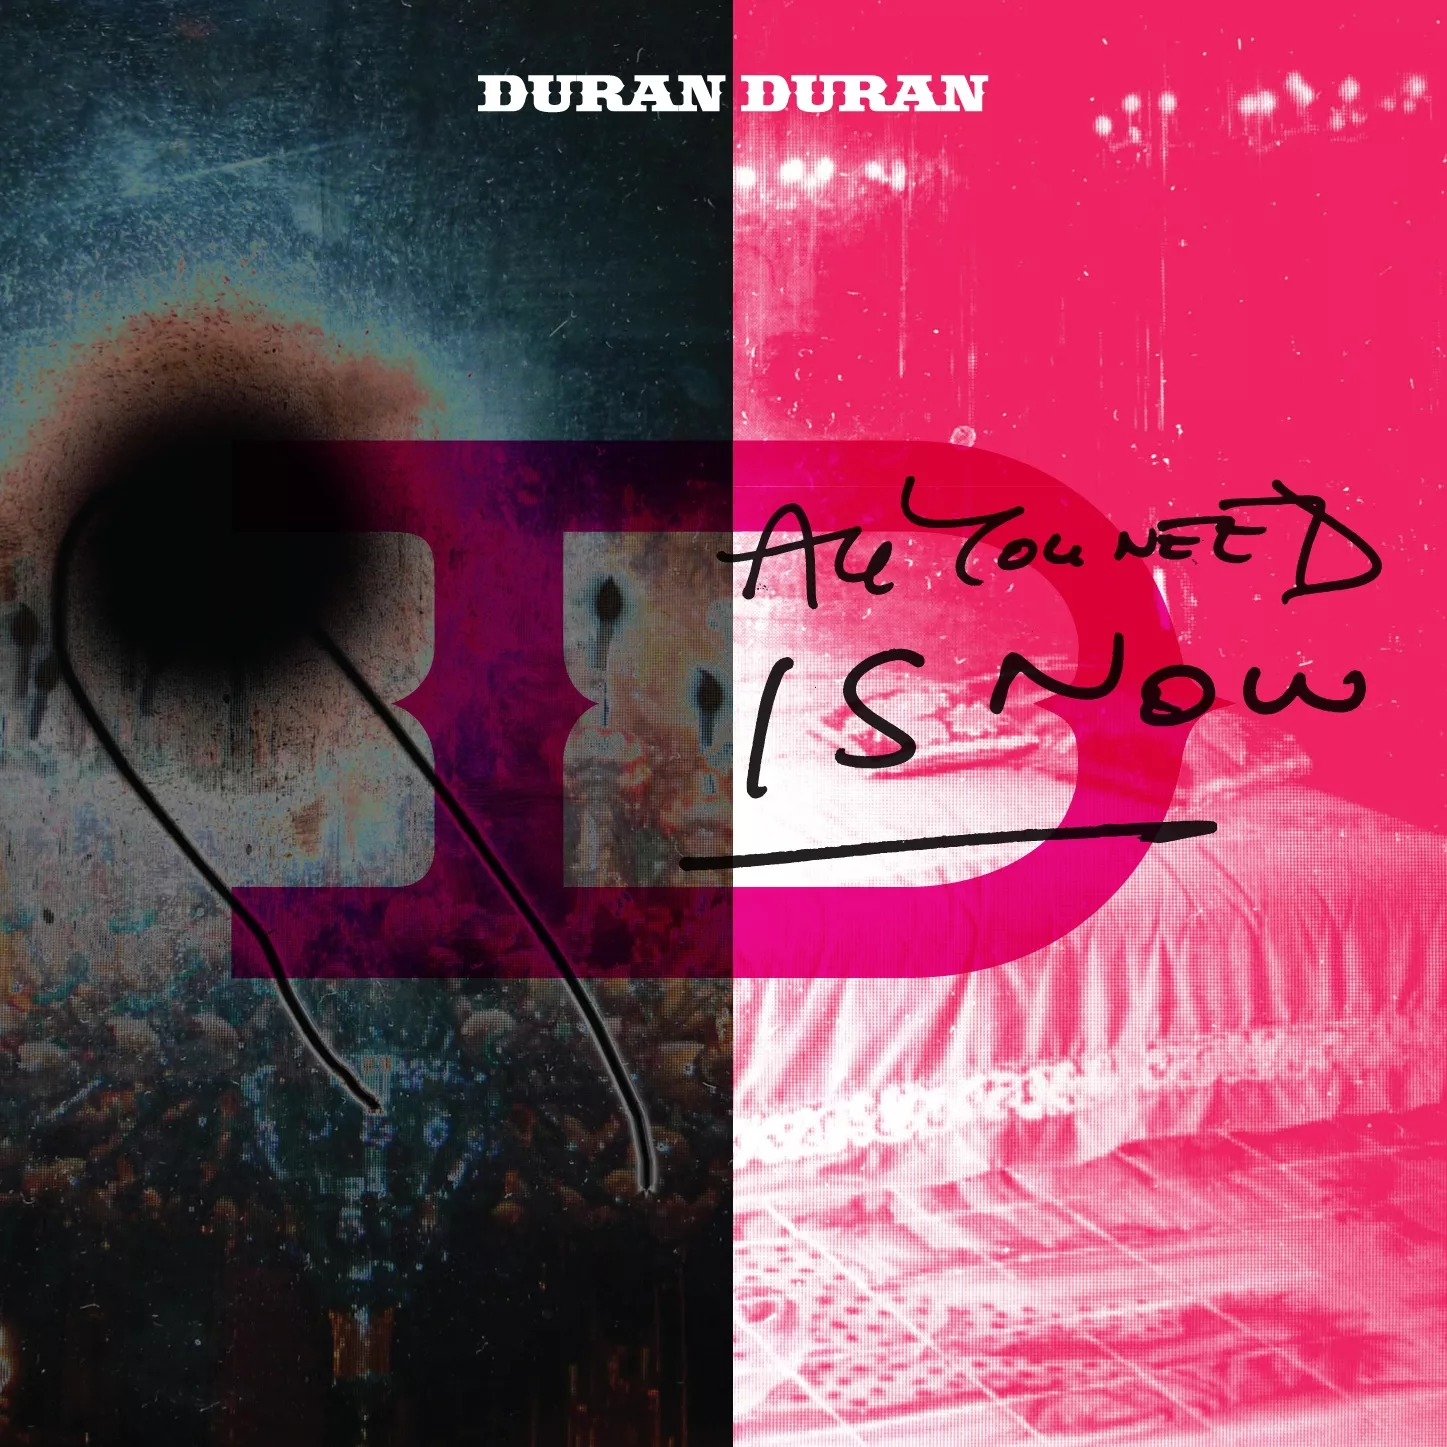 All you need is now - Duran Duran